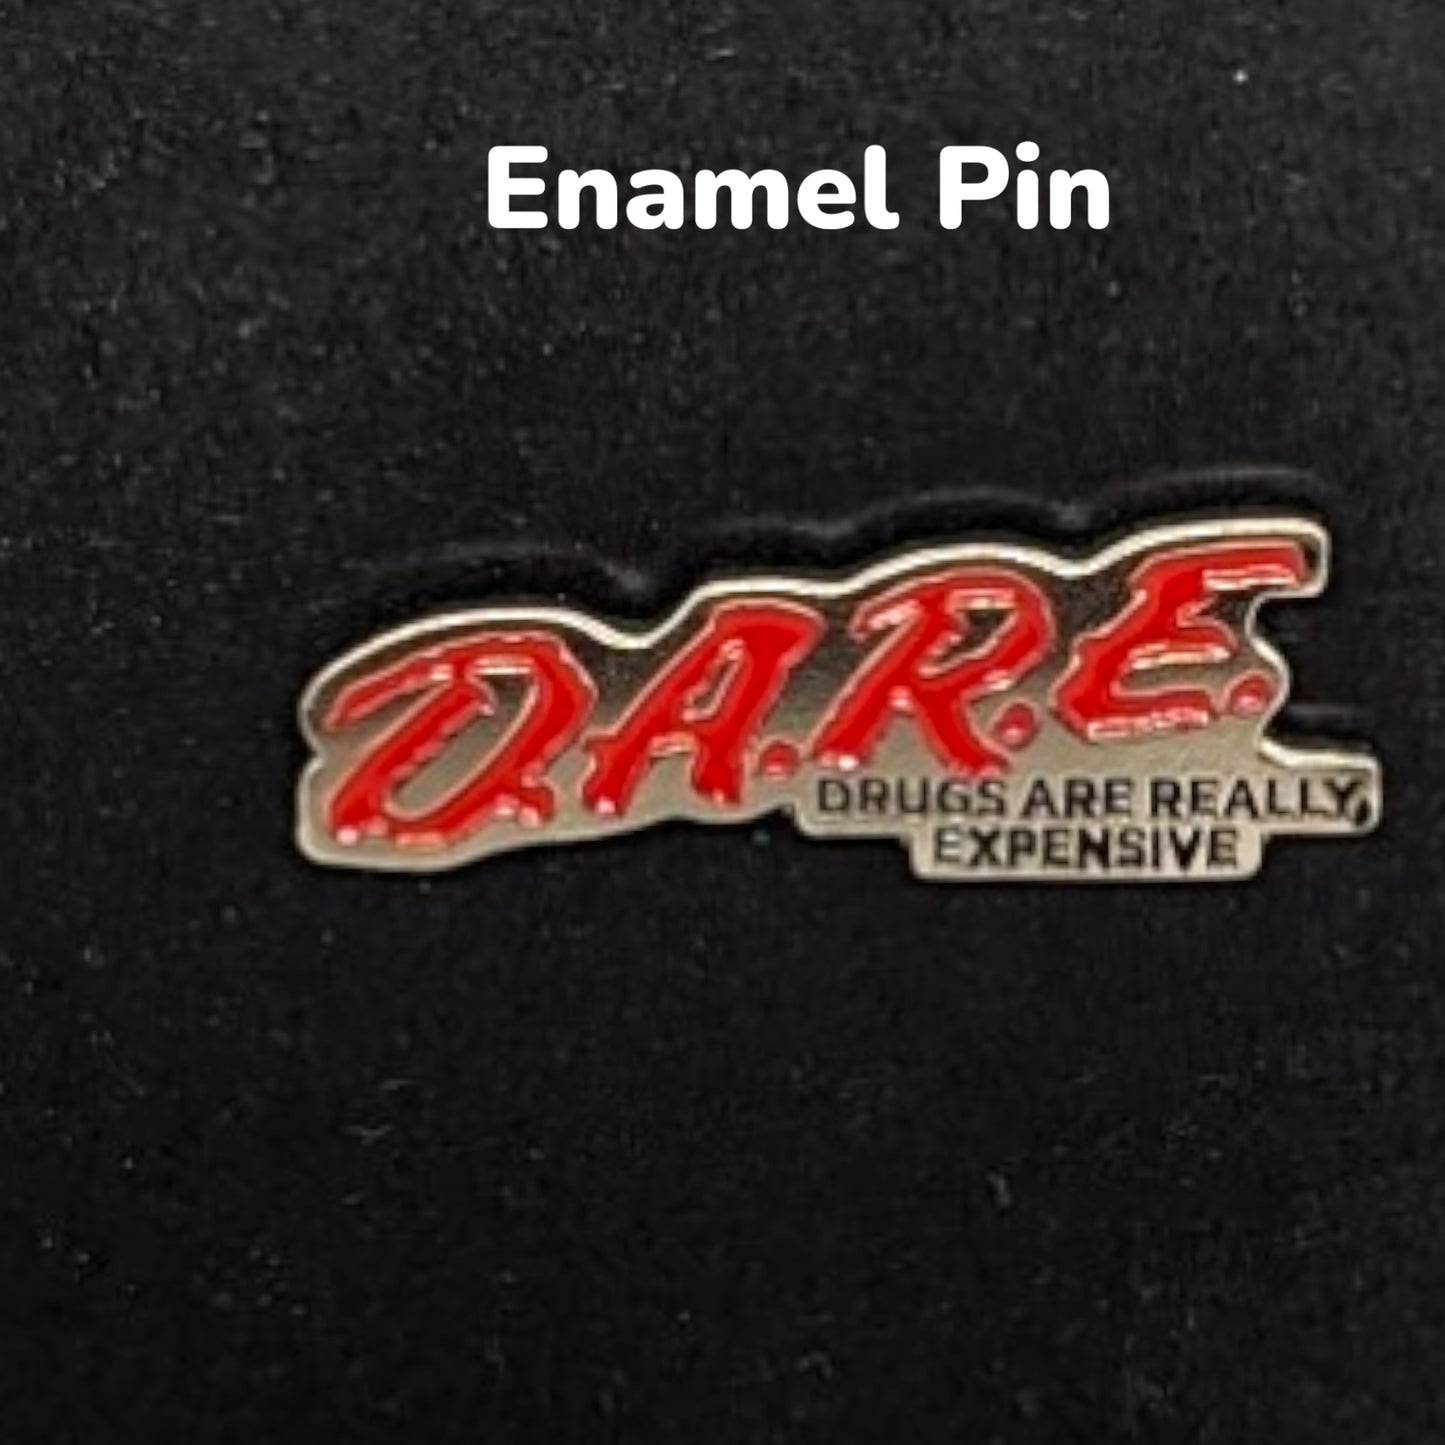 D.A.R.E Drugs Are Really Expensive Enamel Pin #148